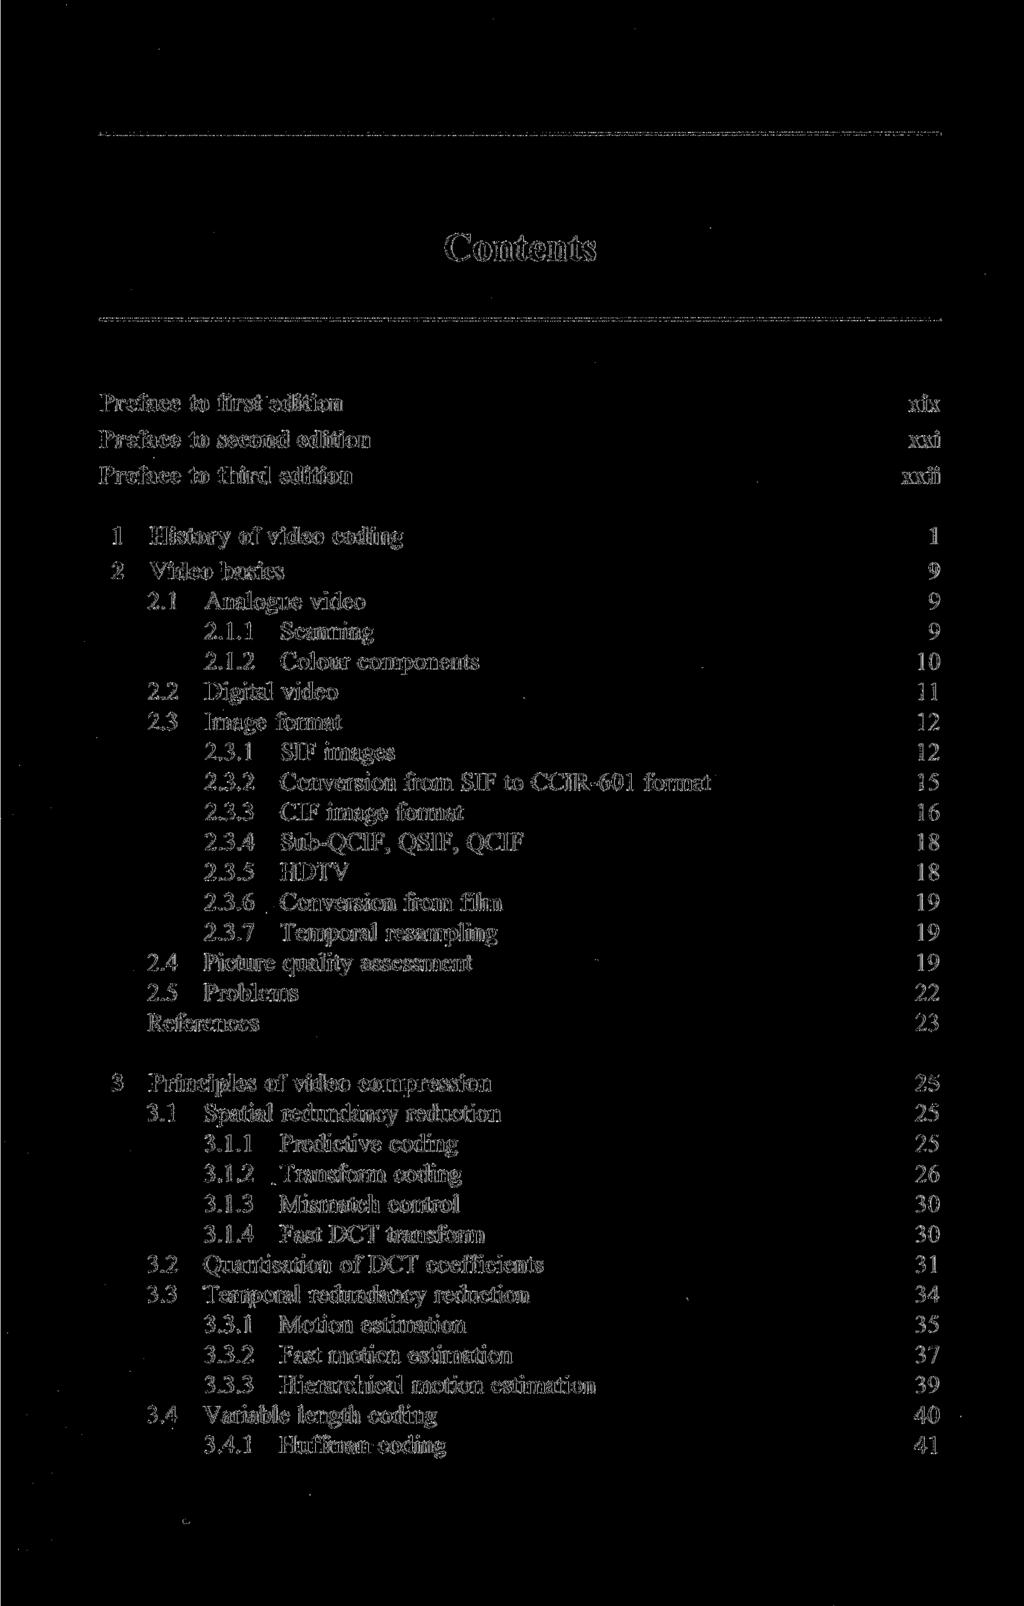 Contents Preface to first edition Preface to second edition Preface to third edition 1 History of video coding 2 Video basics 2.1 Analoj gue video 2.1.1 2.1.2 2.2 Digital video 2.3 Image 2.3.1 2.3.2 2.3.3 2.